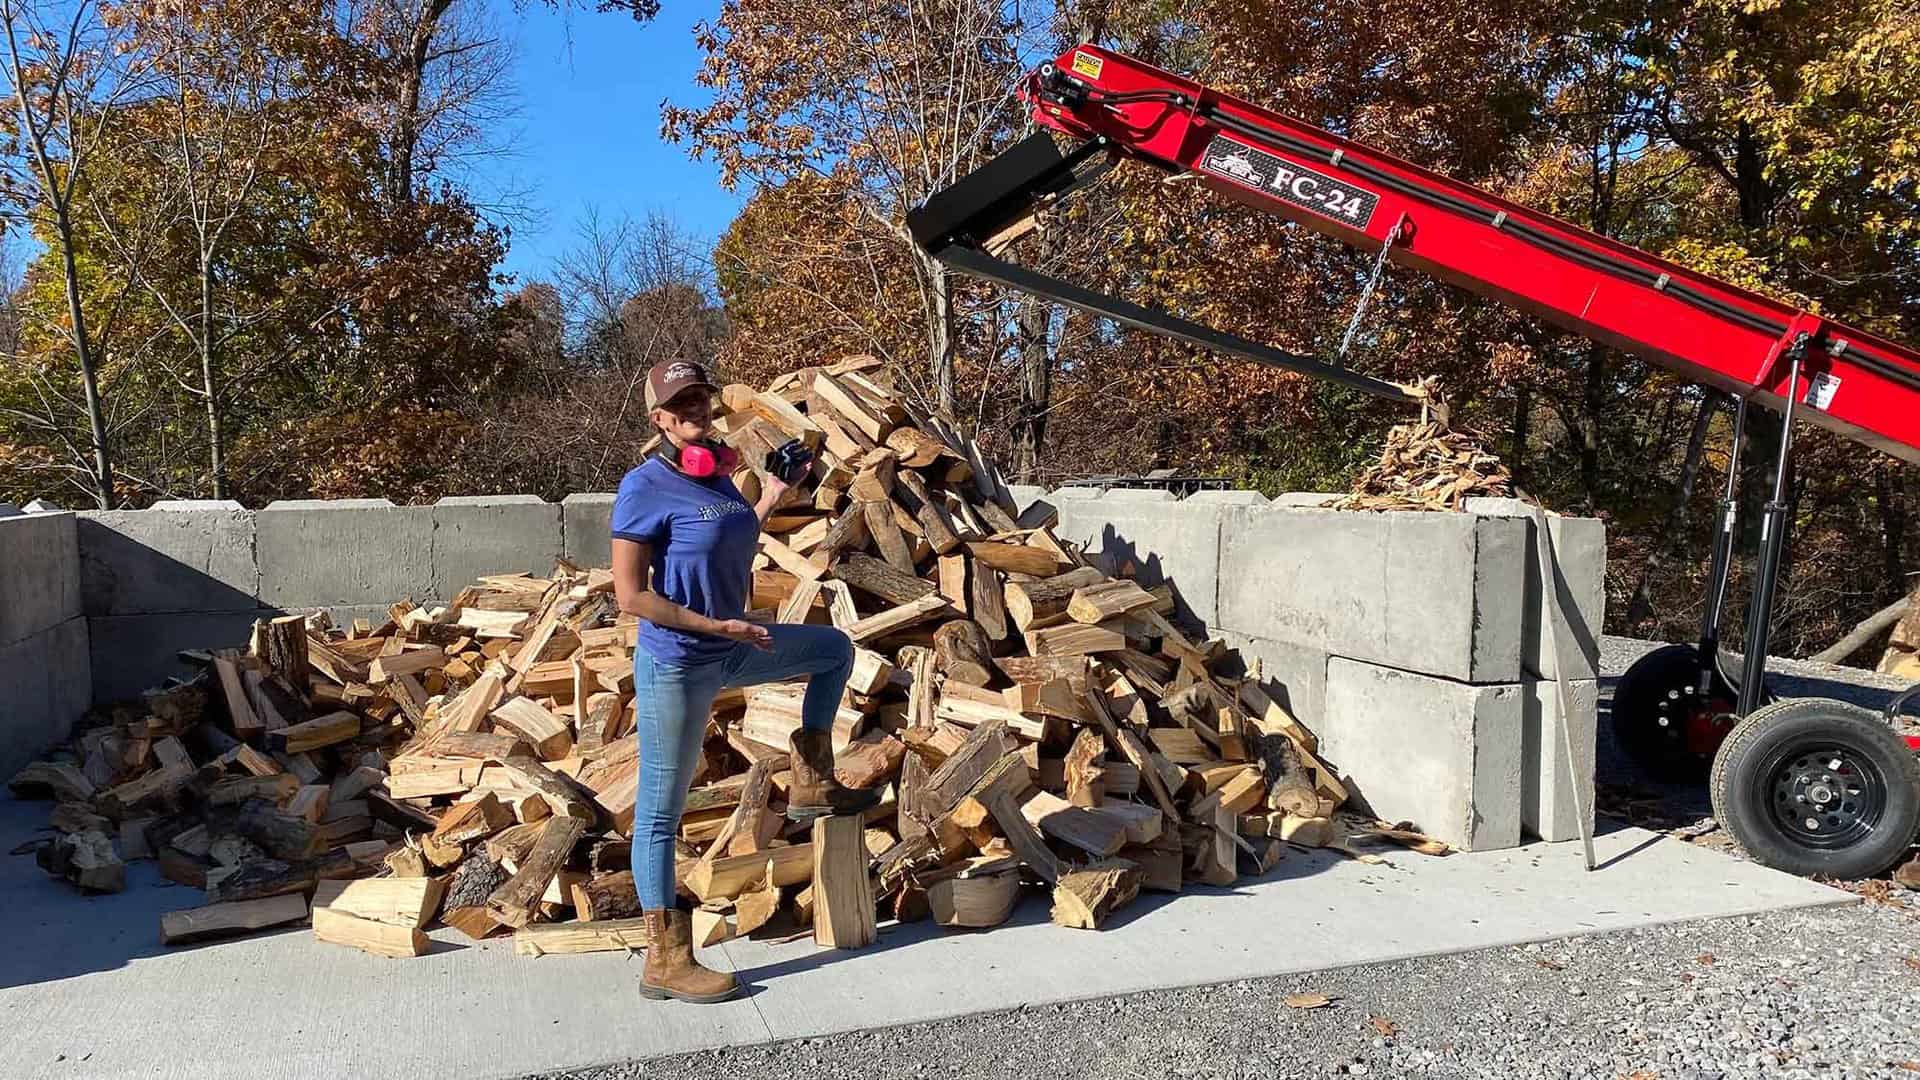 Selling Fire wood is one form of monetization for Mike and family